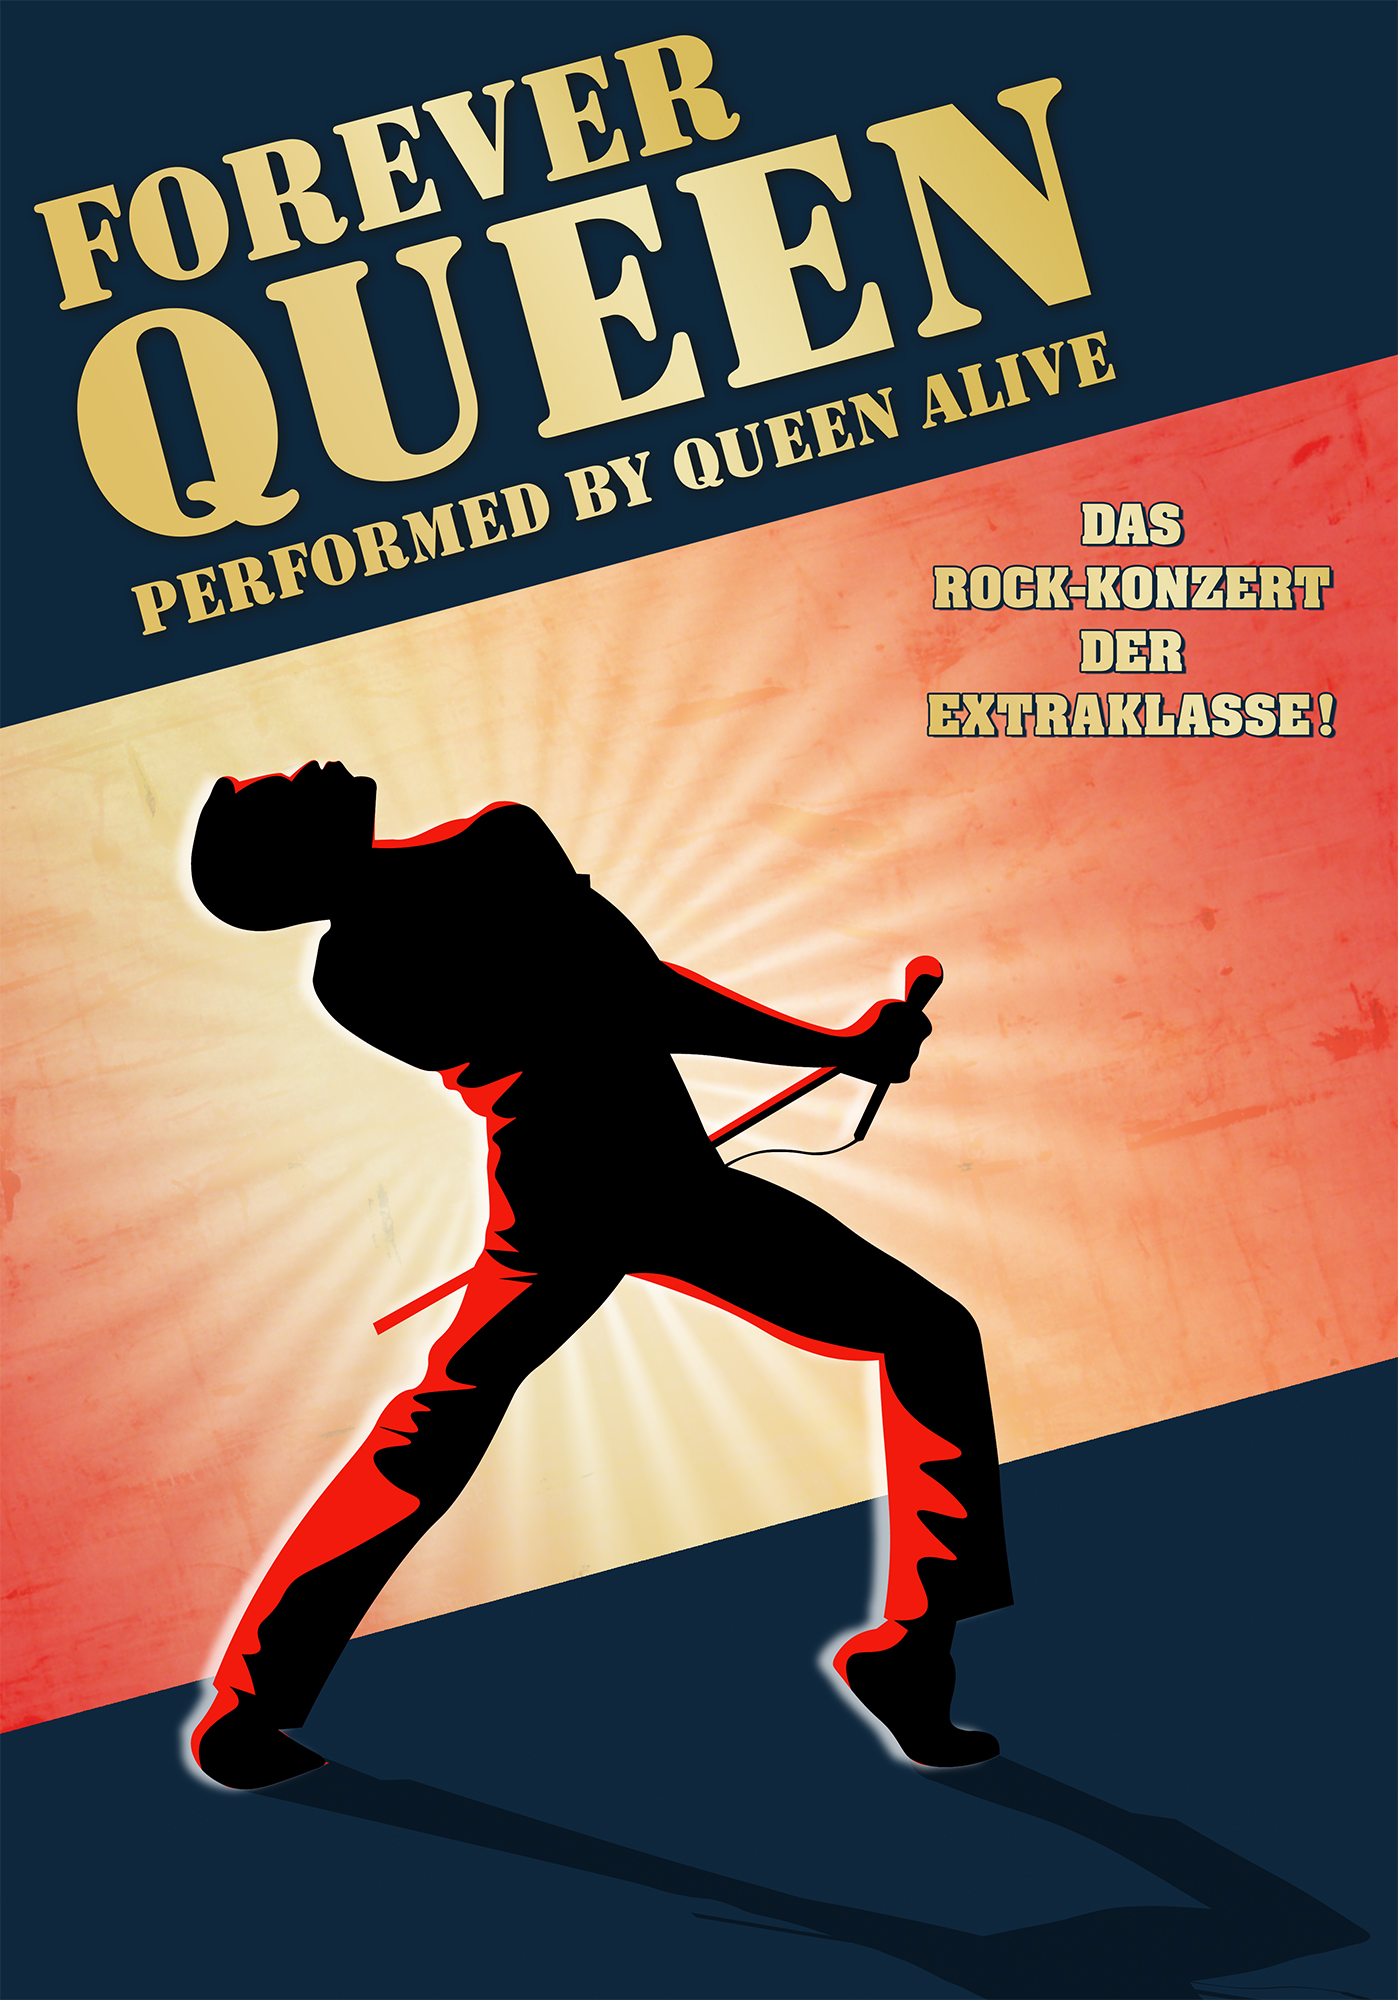 FOREVER QUEEN – performed by Queen Alive